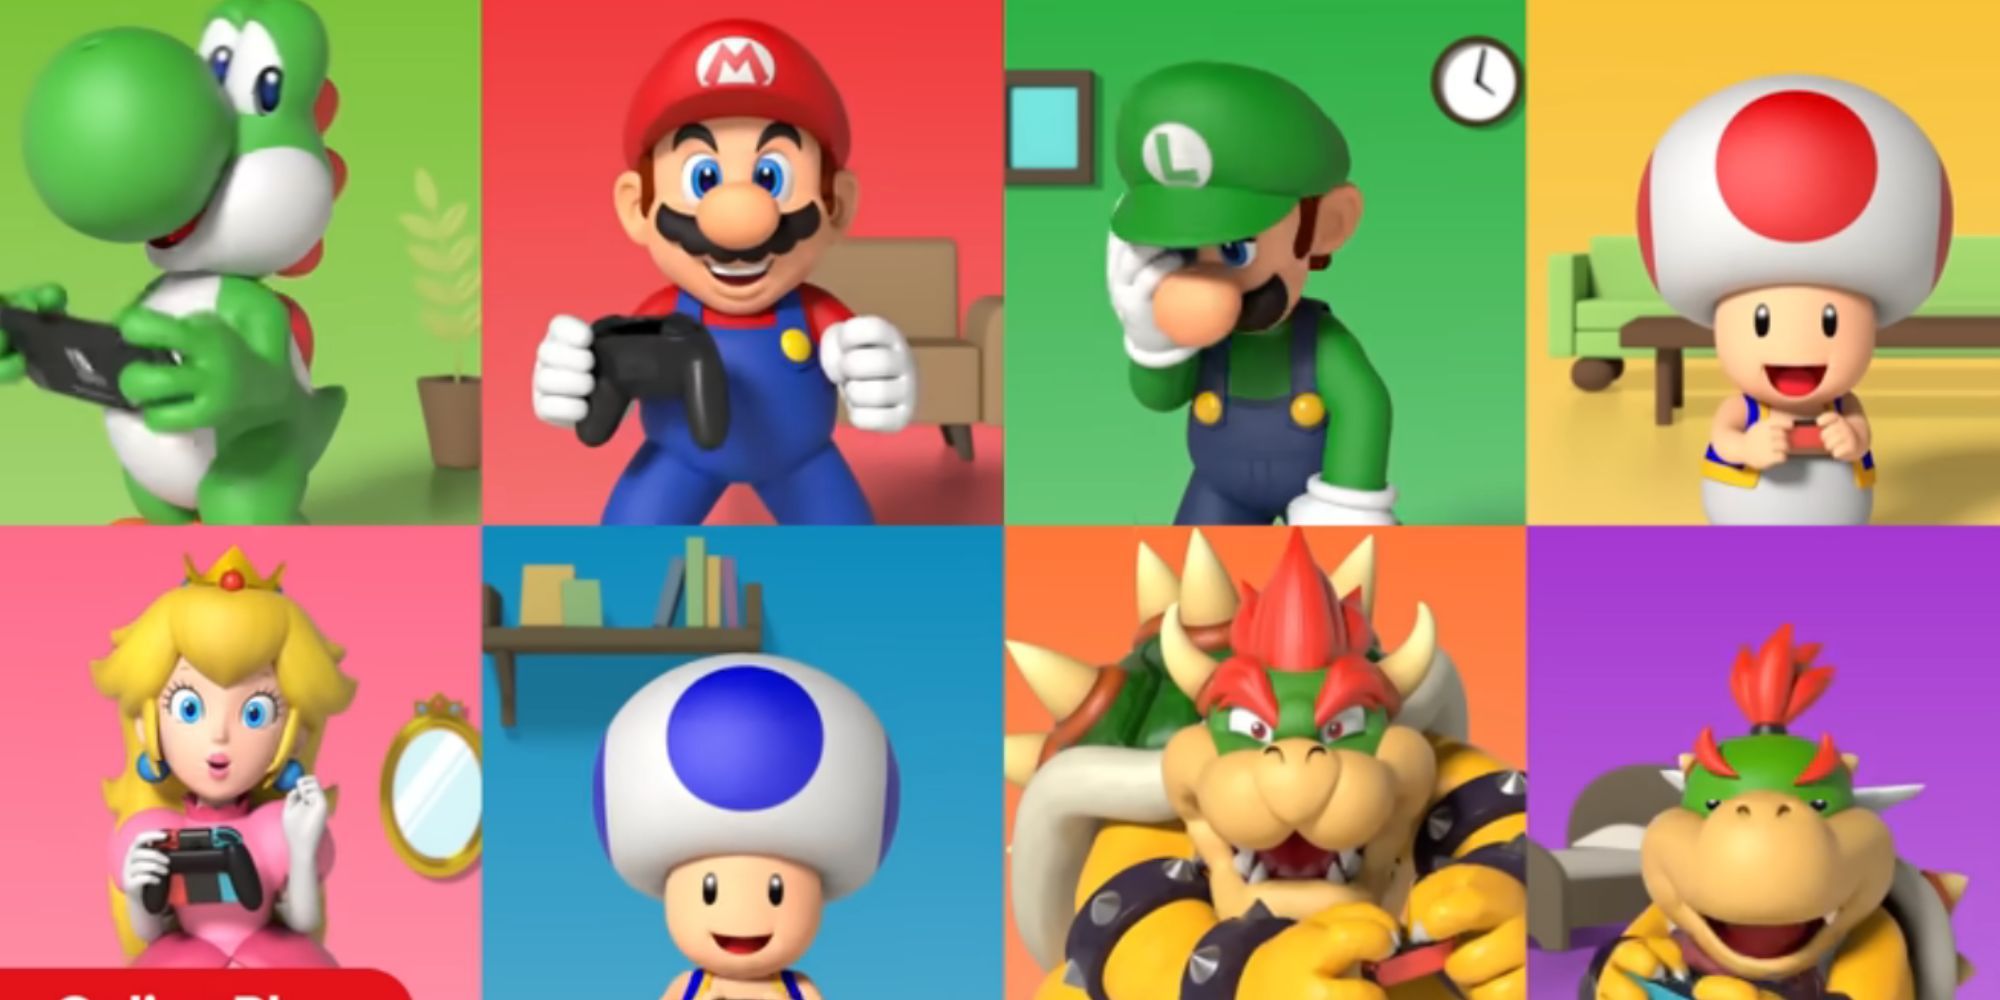 Yoshi, Mario, Luigi, Toad, Peach, Bowser, and Bowser Jr. play Switch together